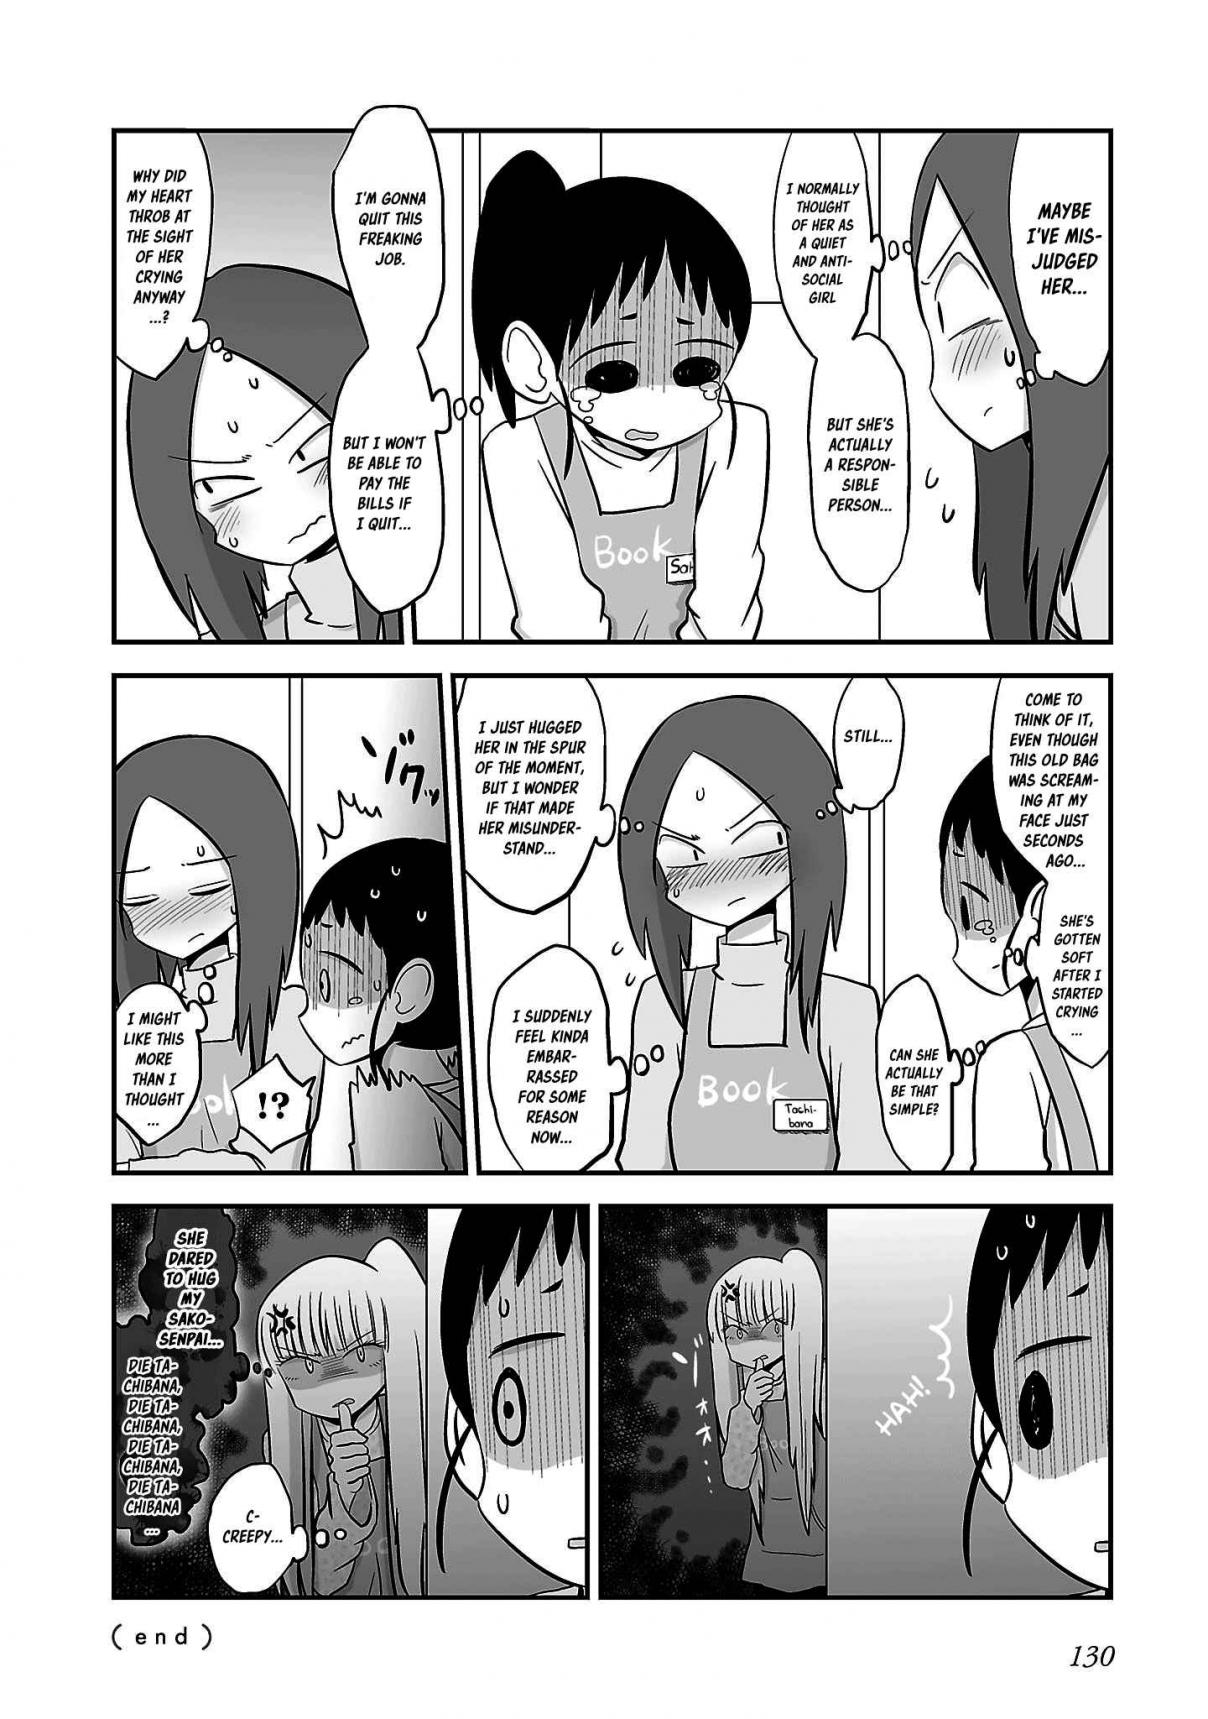 A Socially Awkward Girl Got Kissed By A Kouhai She Never Talked To Once Before Ch. 2 After